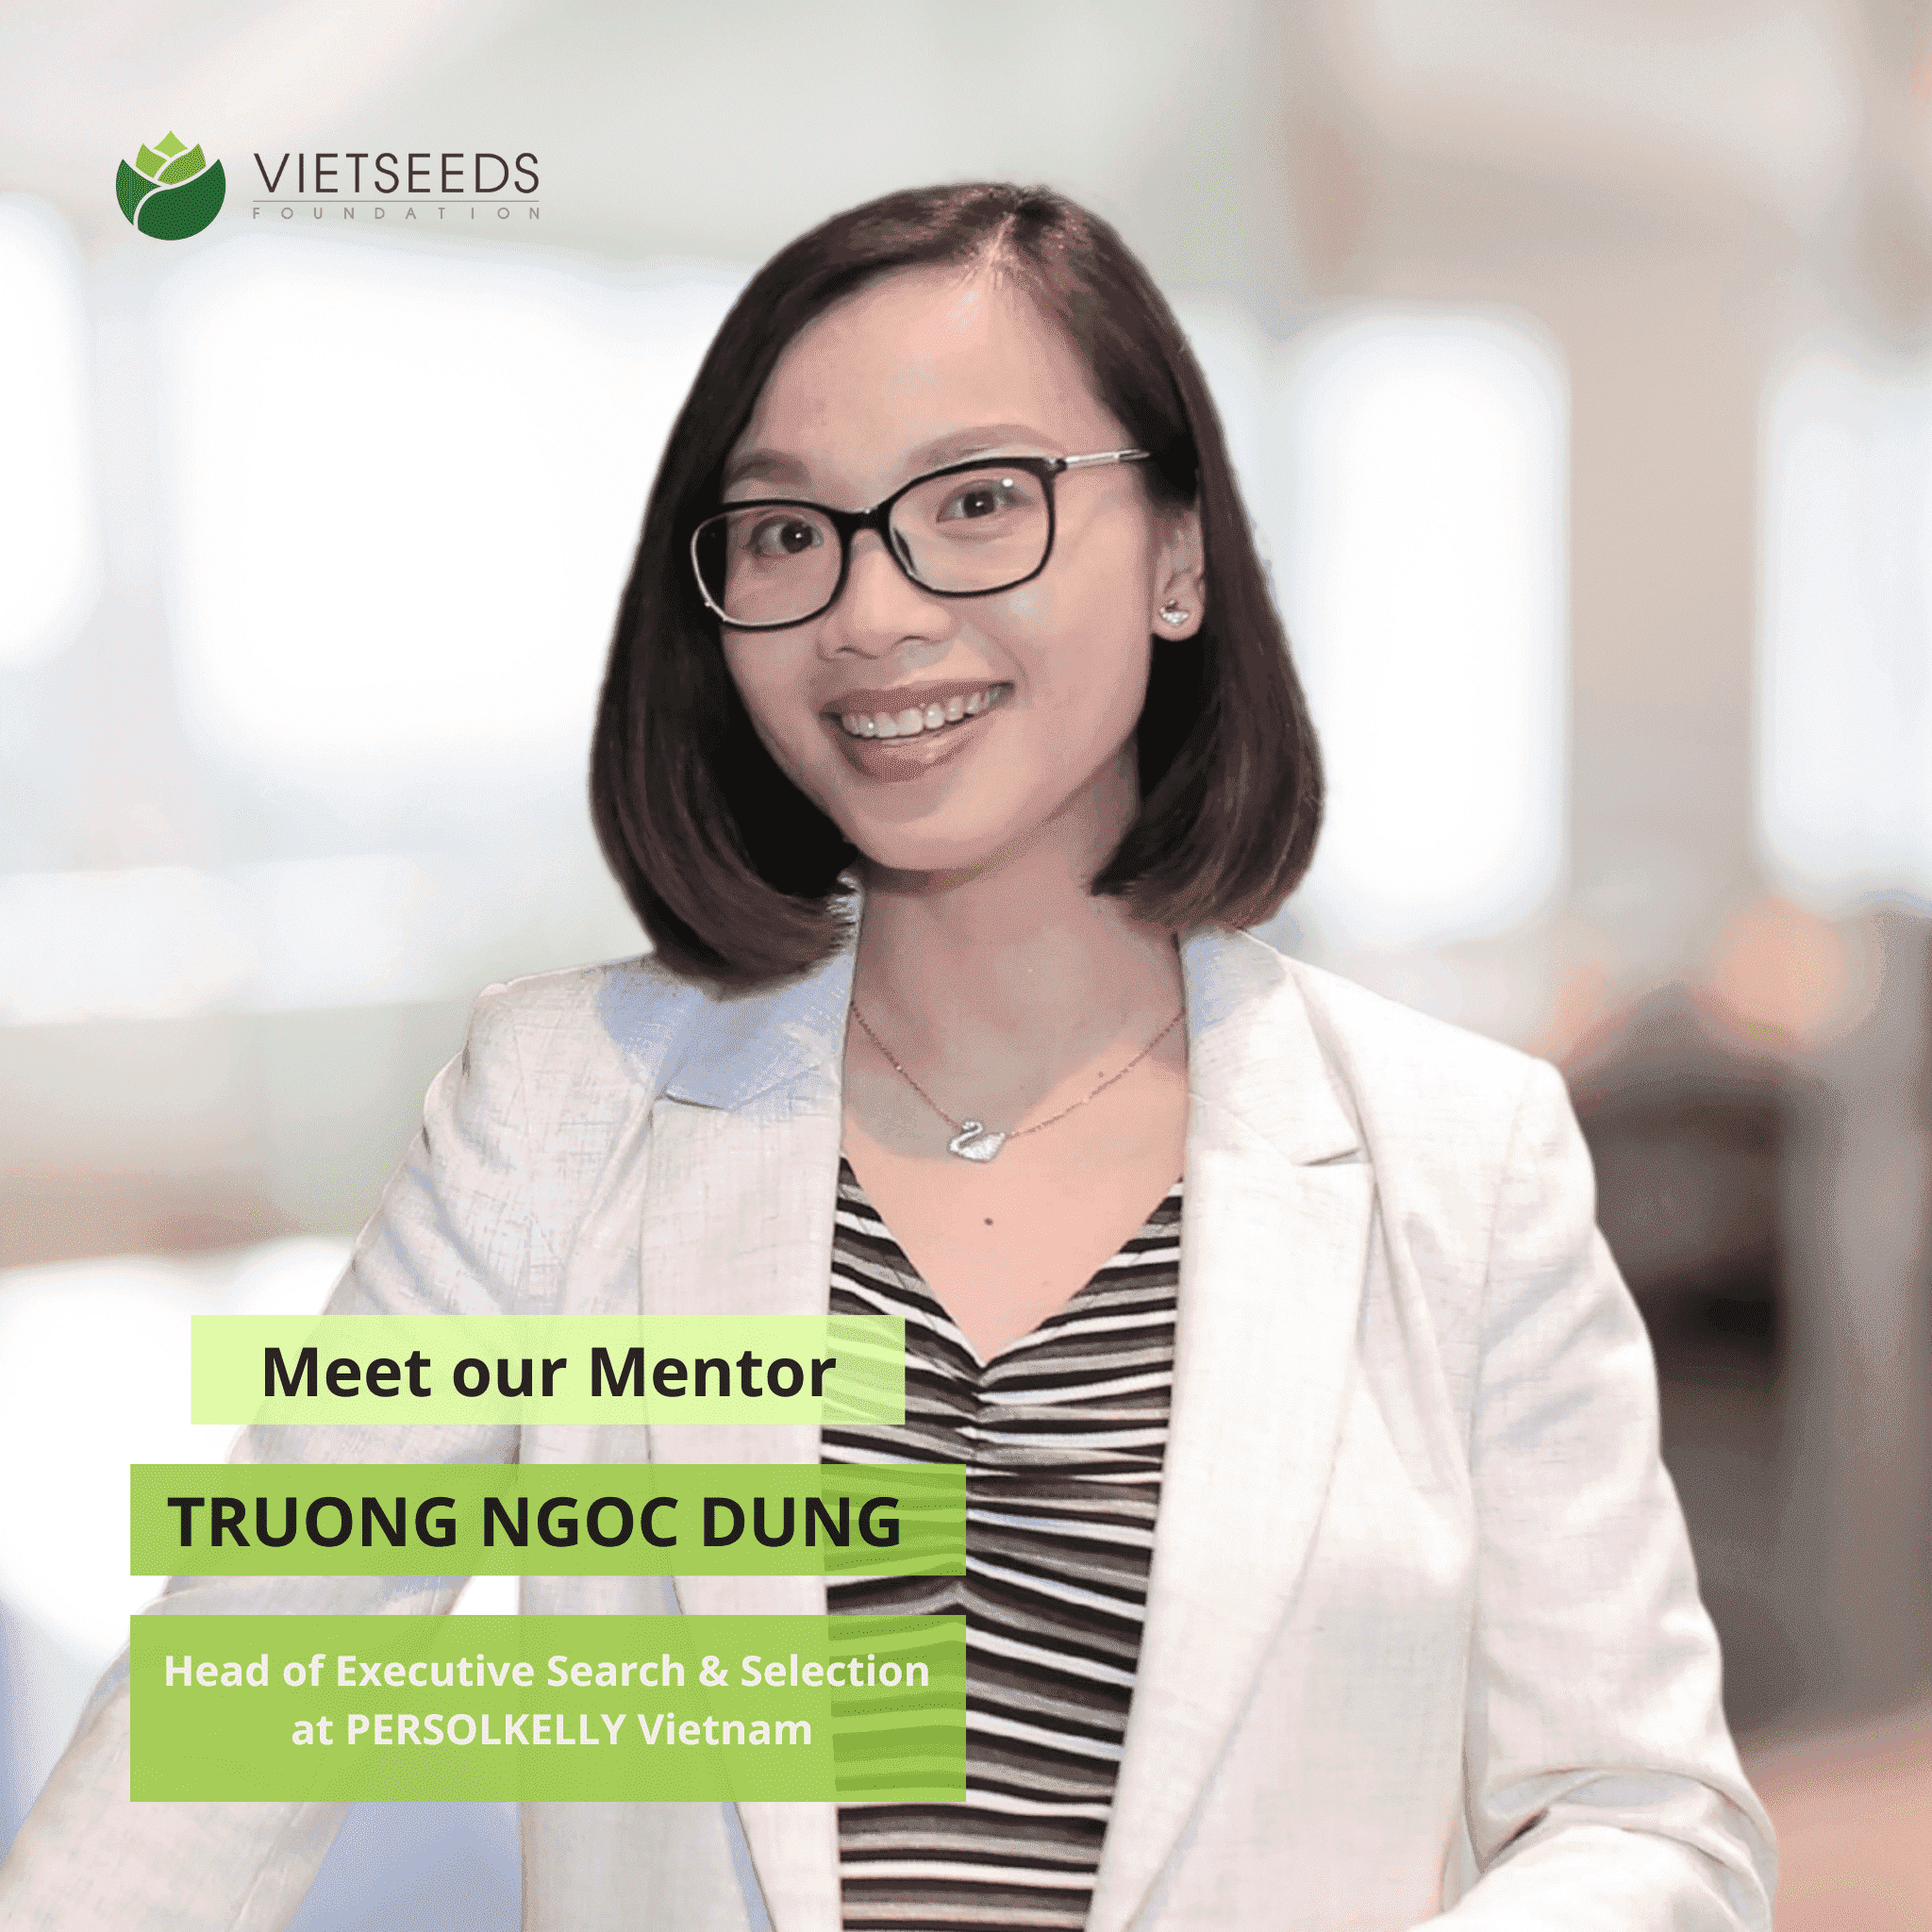 MENTOR TRUONG NGOC DUNG SHARES HER EMOTIONS WHEN SHE ENTERS THE 7TH YEAR OF ACCOMPANYING VIETSEEDS